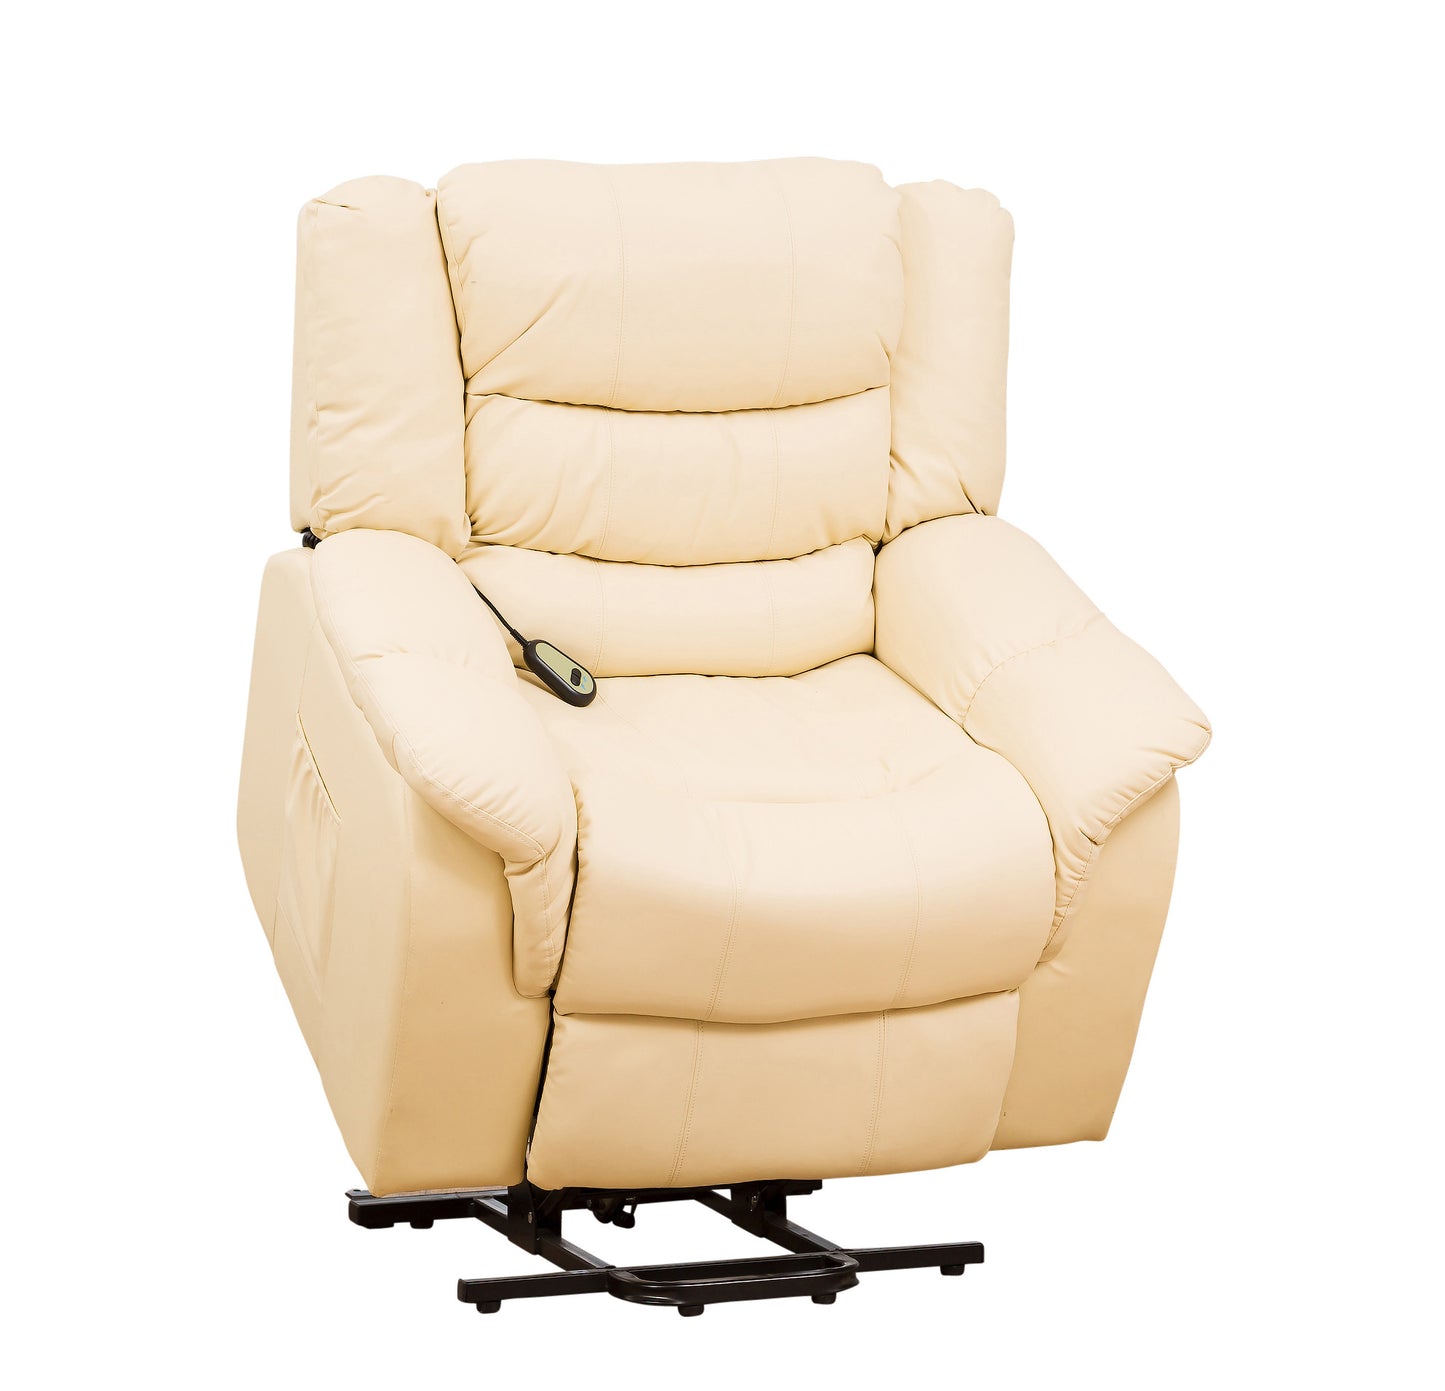 Recliner Leather Armchair Riser Recliner Function to aid Mobility in Black, Brown, Burgundy, Cream, Grey - CasaFenix